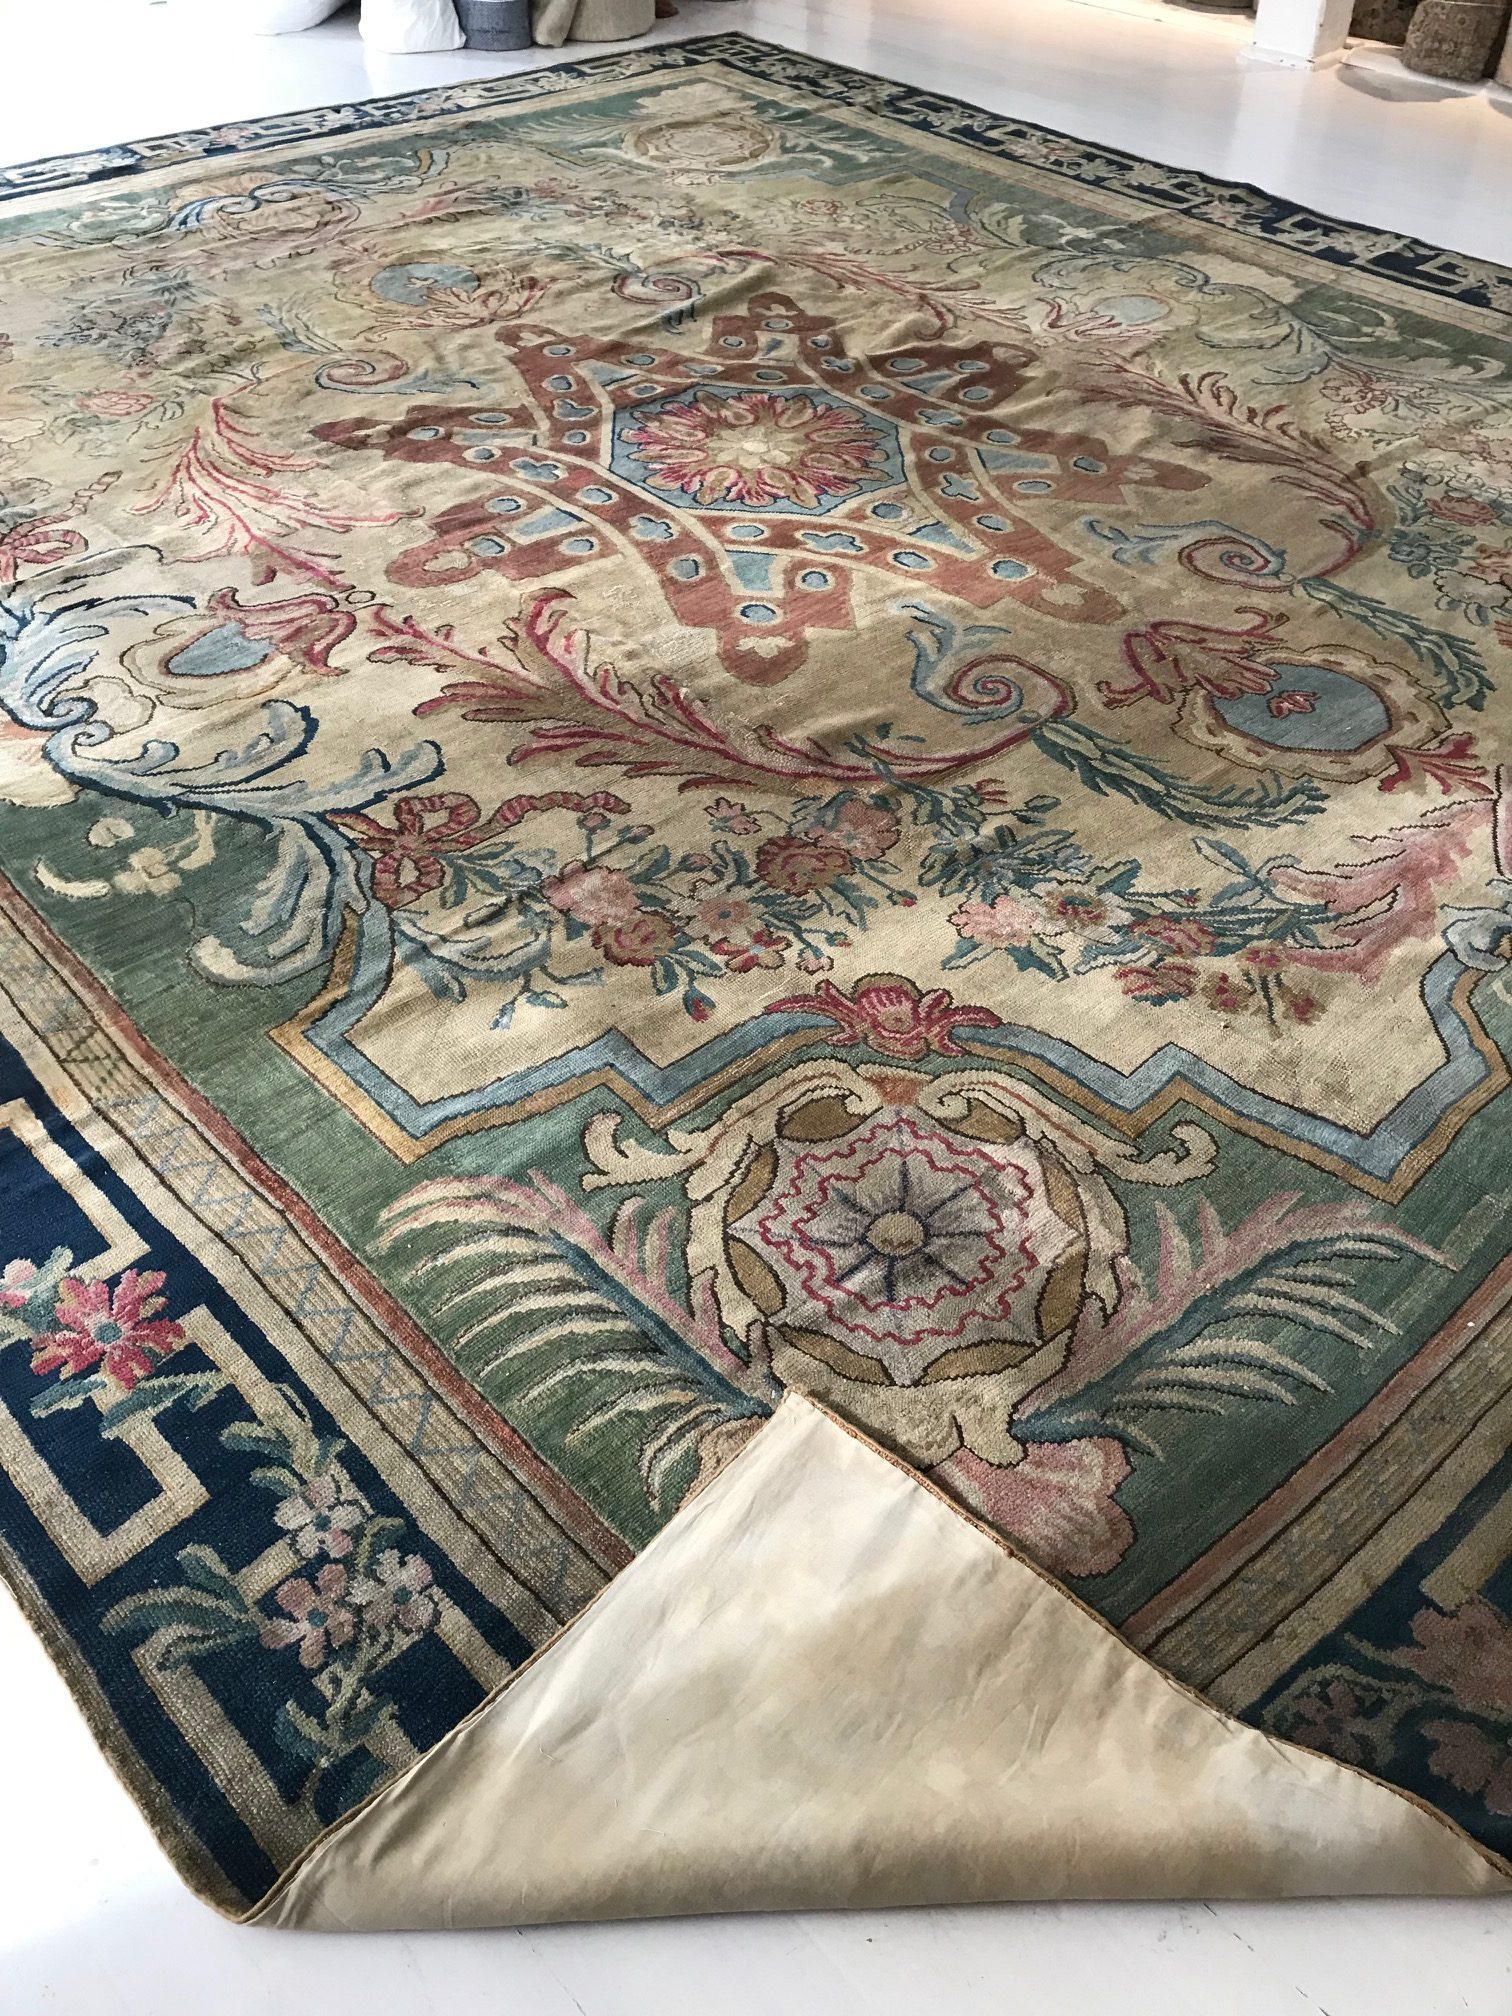 Large authentic Savonnerie bold handmade wool rug
Size: 14'10